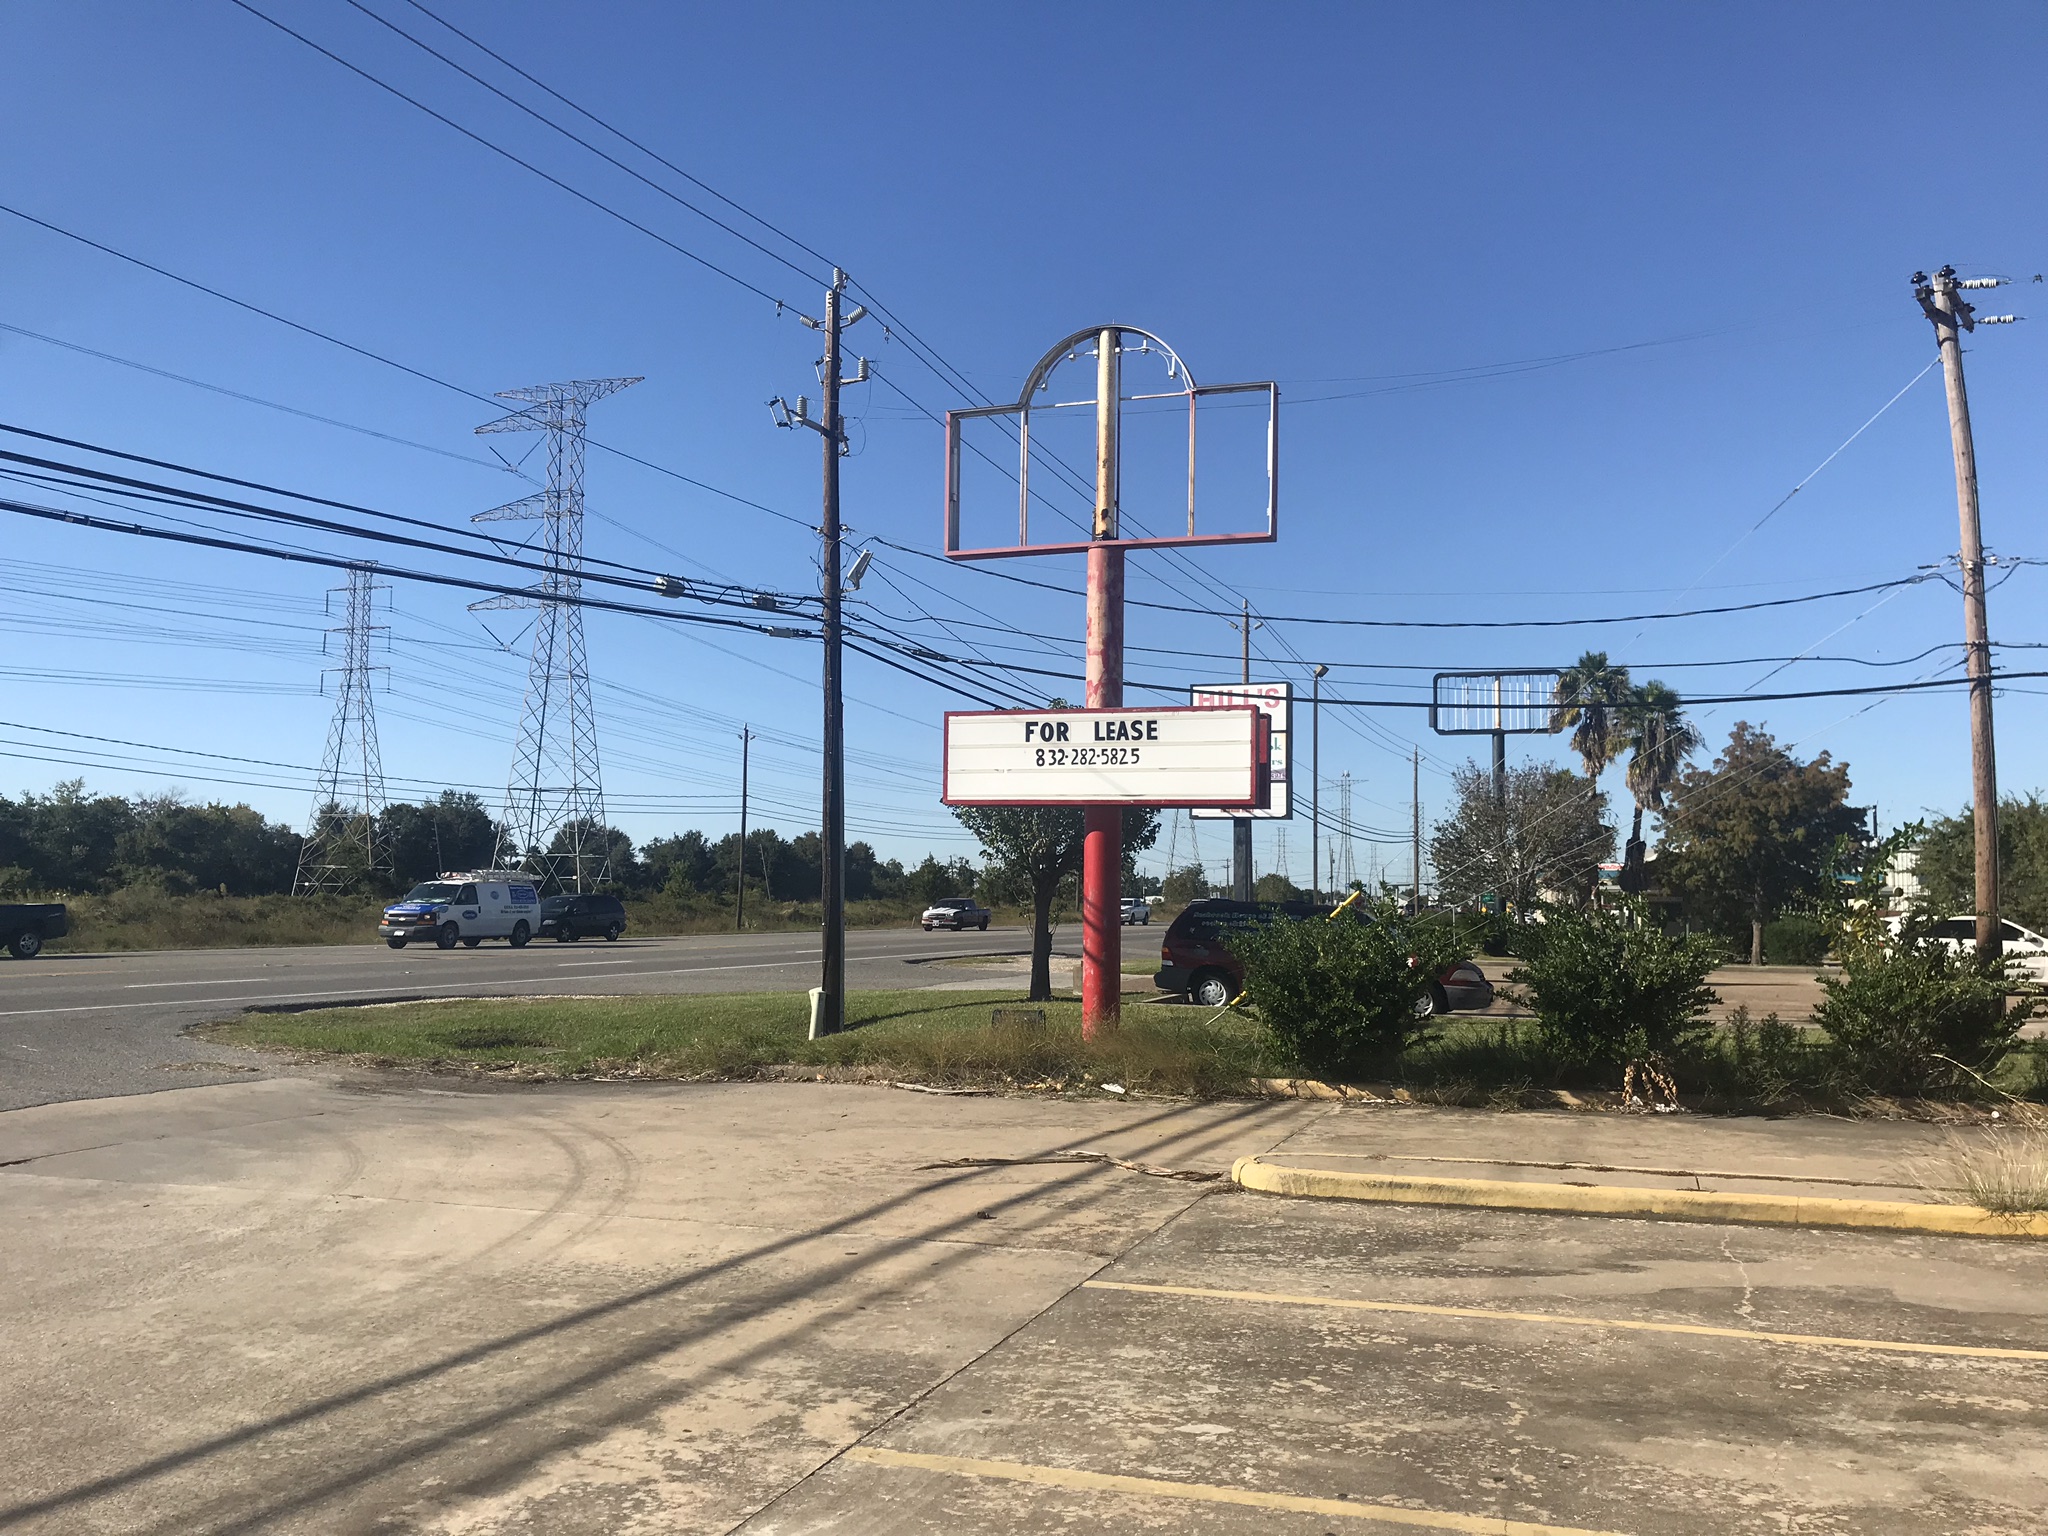 Businesses have closed down due the the State Highway 146 expansion Project, including Popeye's.